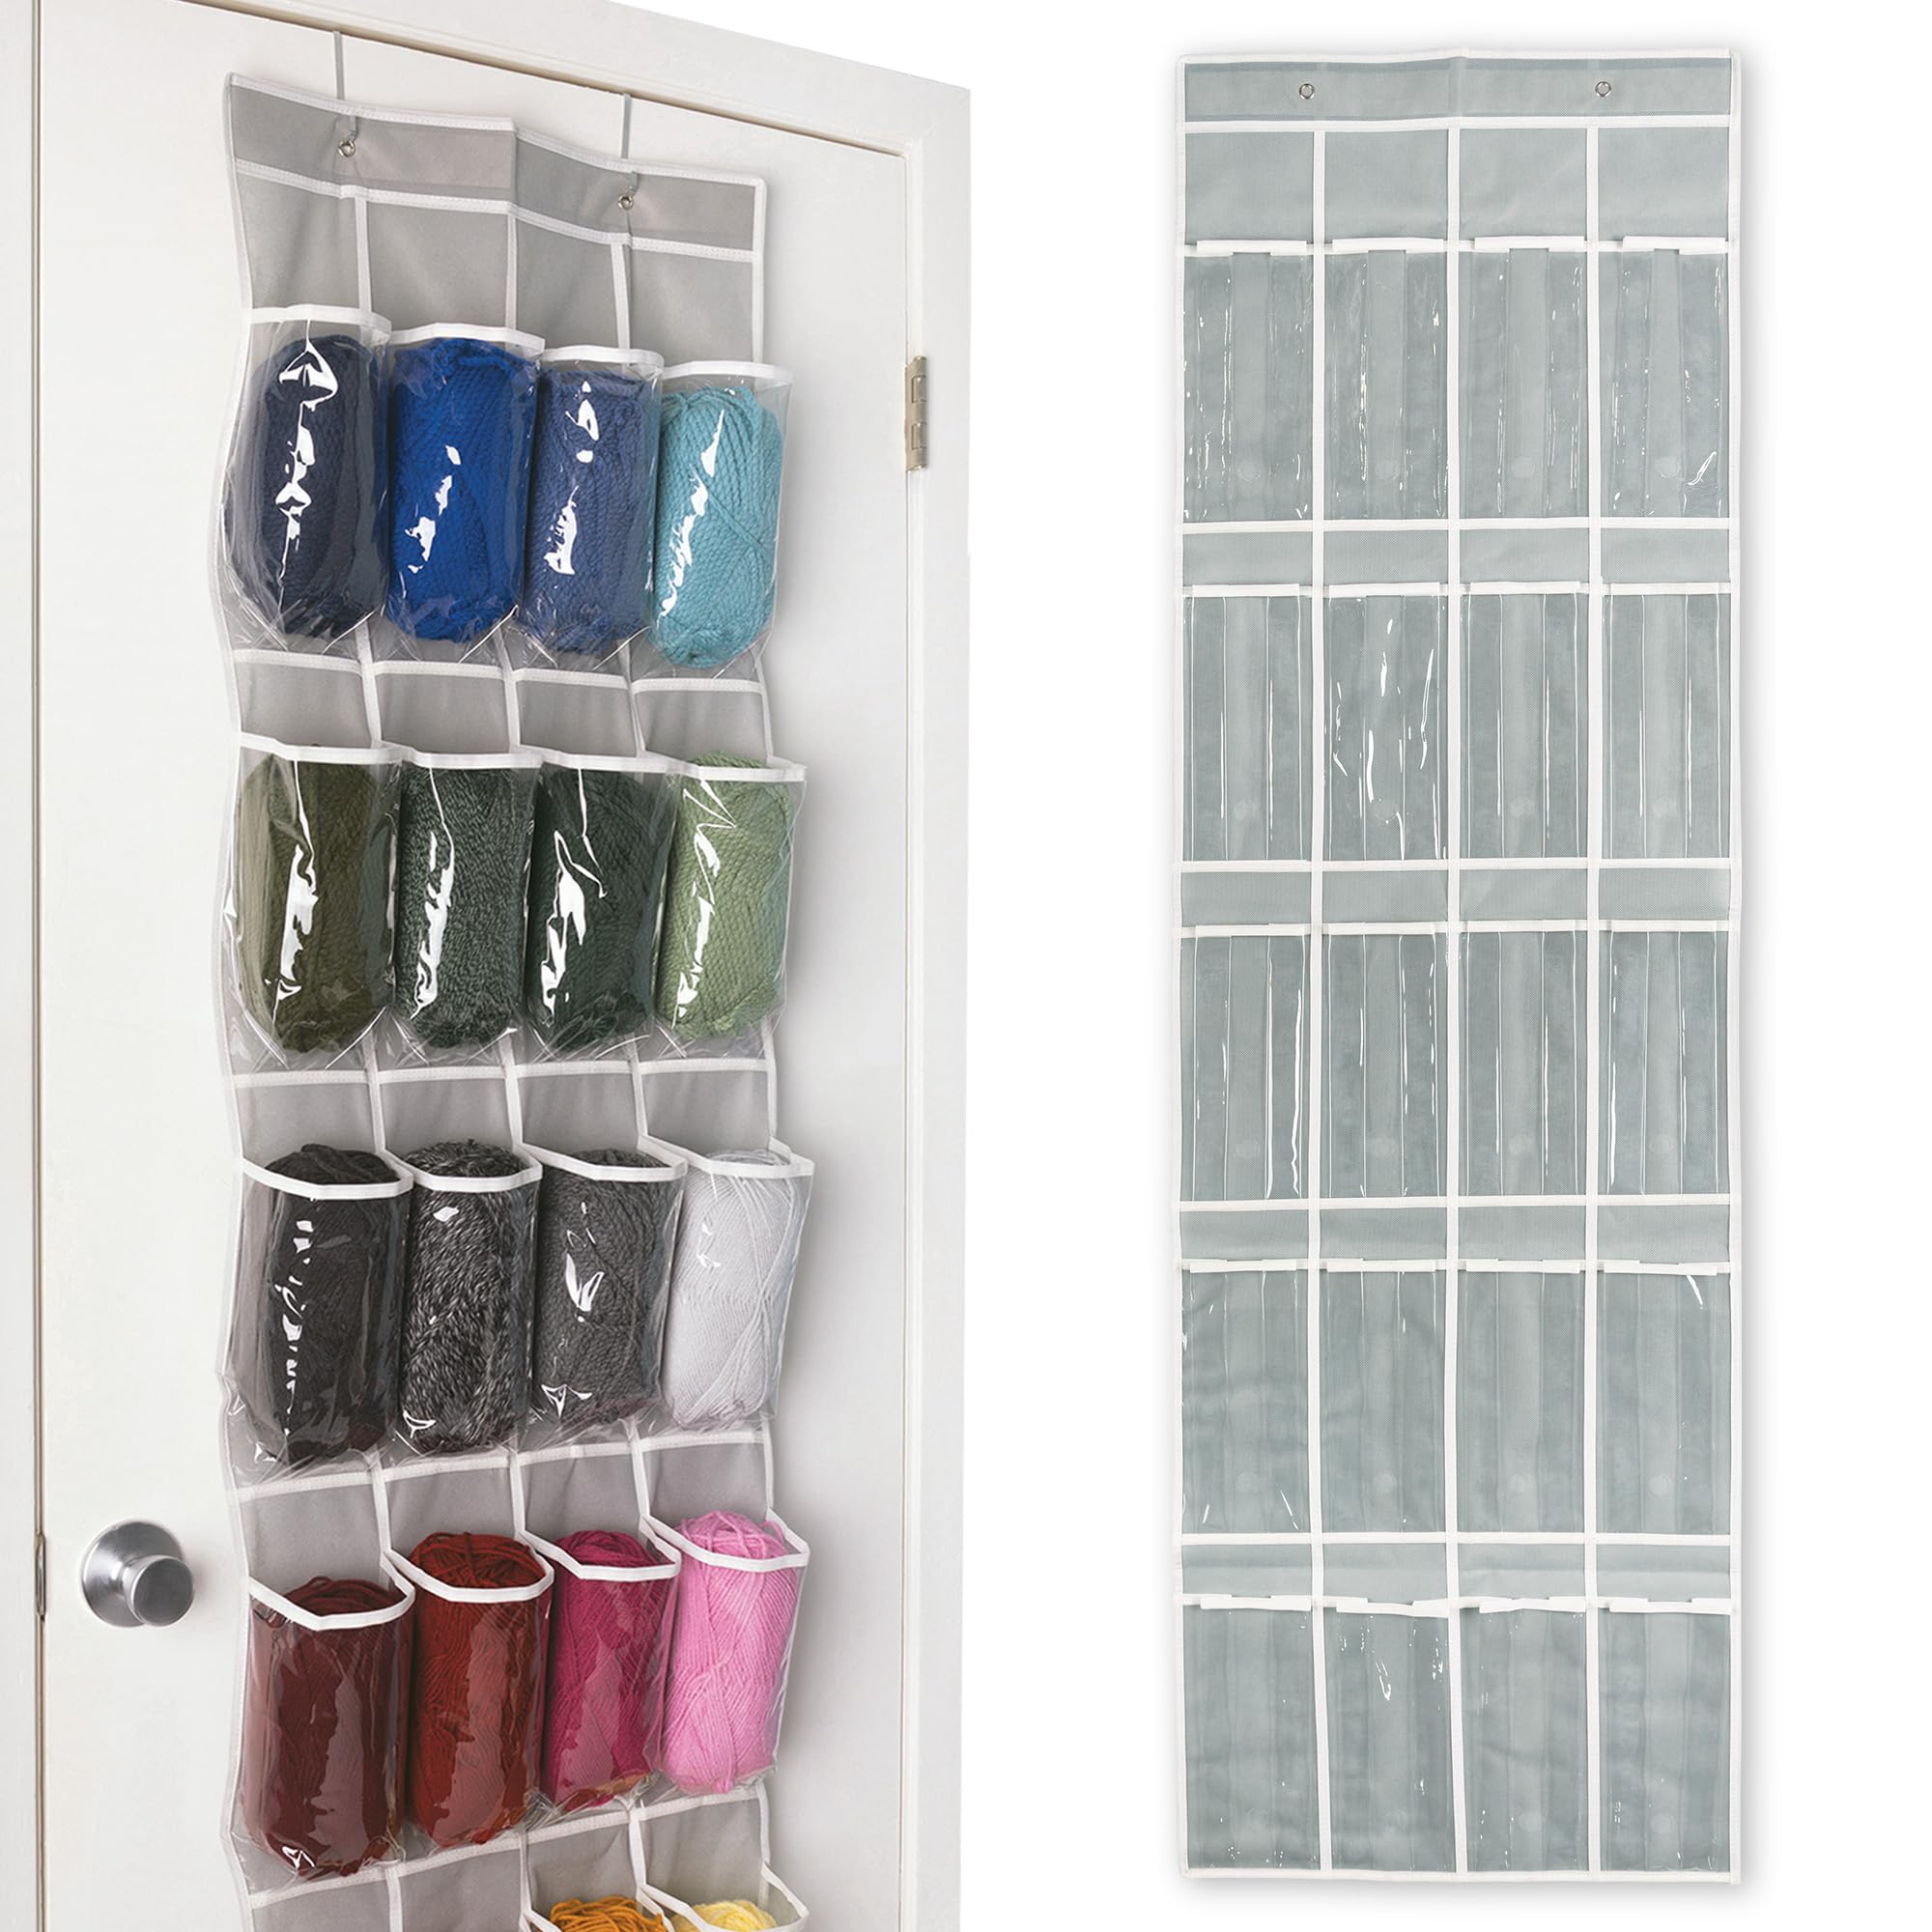 Samsill Over the Door Hanging Yarn Bag Holds 20 Skeins, Clear Expandable Compartments with Individual Holes Allow Easy Access to Yarn, Dustproof Crochet and Yarn Bag for Organizing Craft Supplies